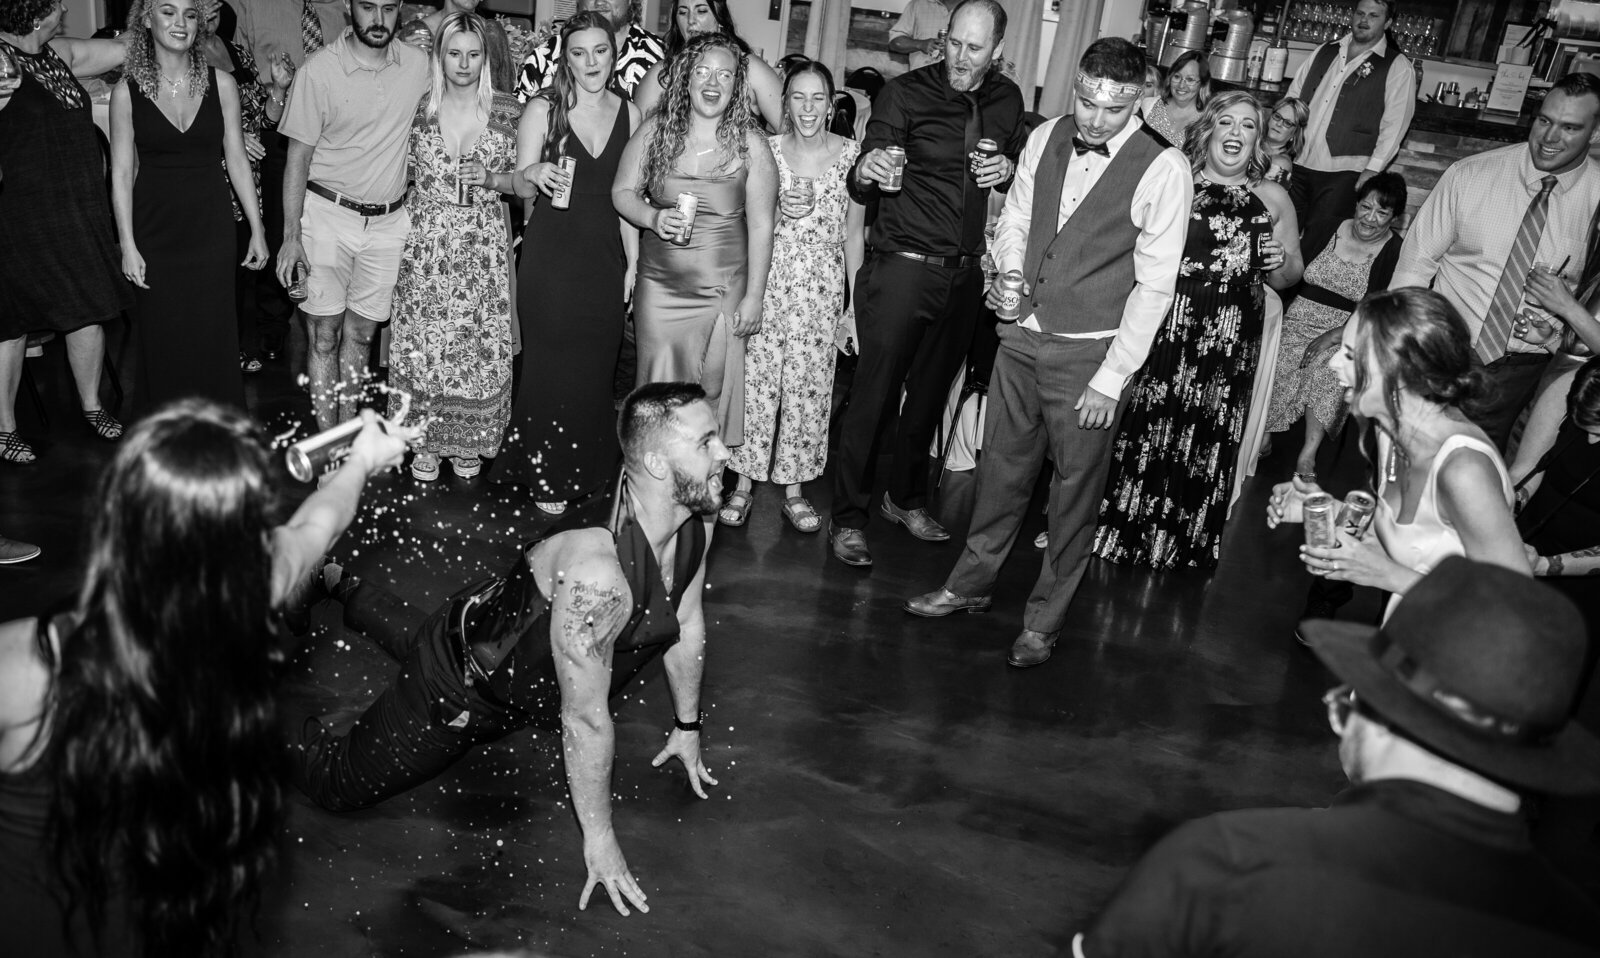 The groom, Ryan Bee, shows off his dance moves for his new wife, Mahalie, as one of their guests sprays beer on him at The Old Blue Rooster Event Center LLC in Lithopolis, Ohio.